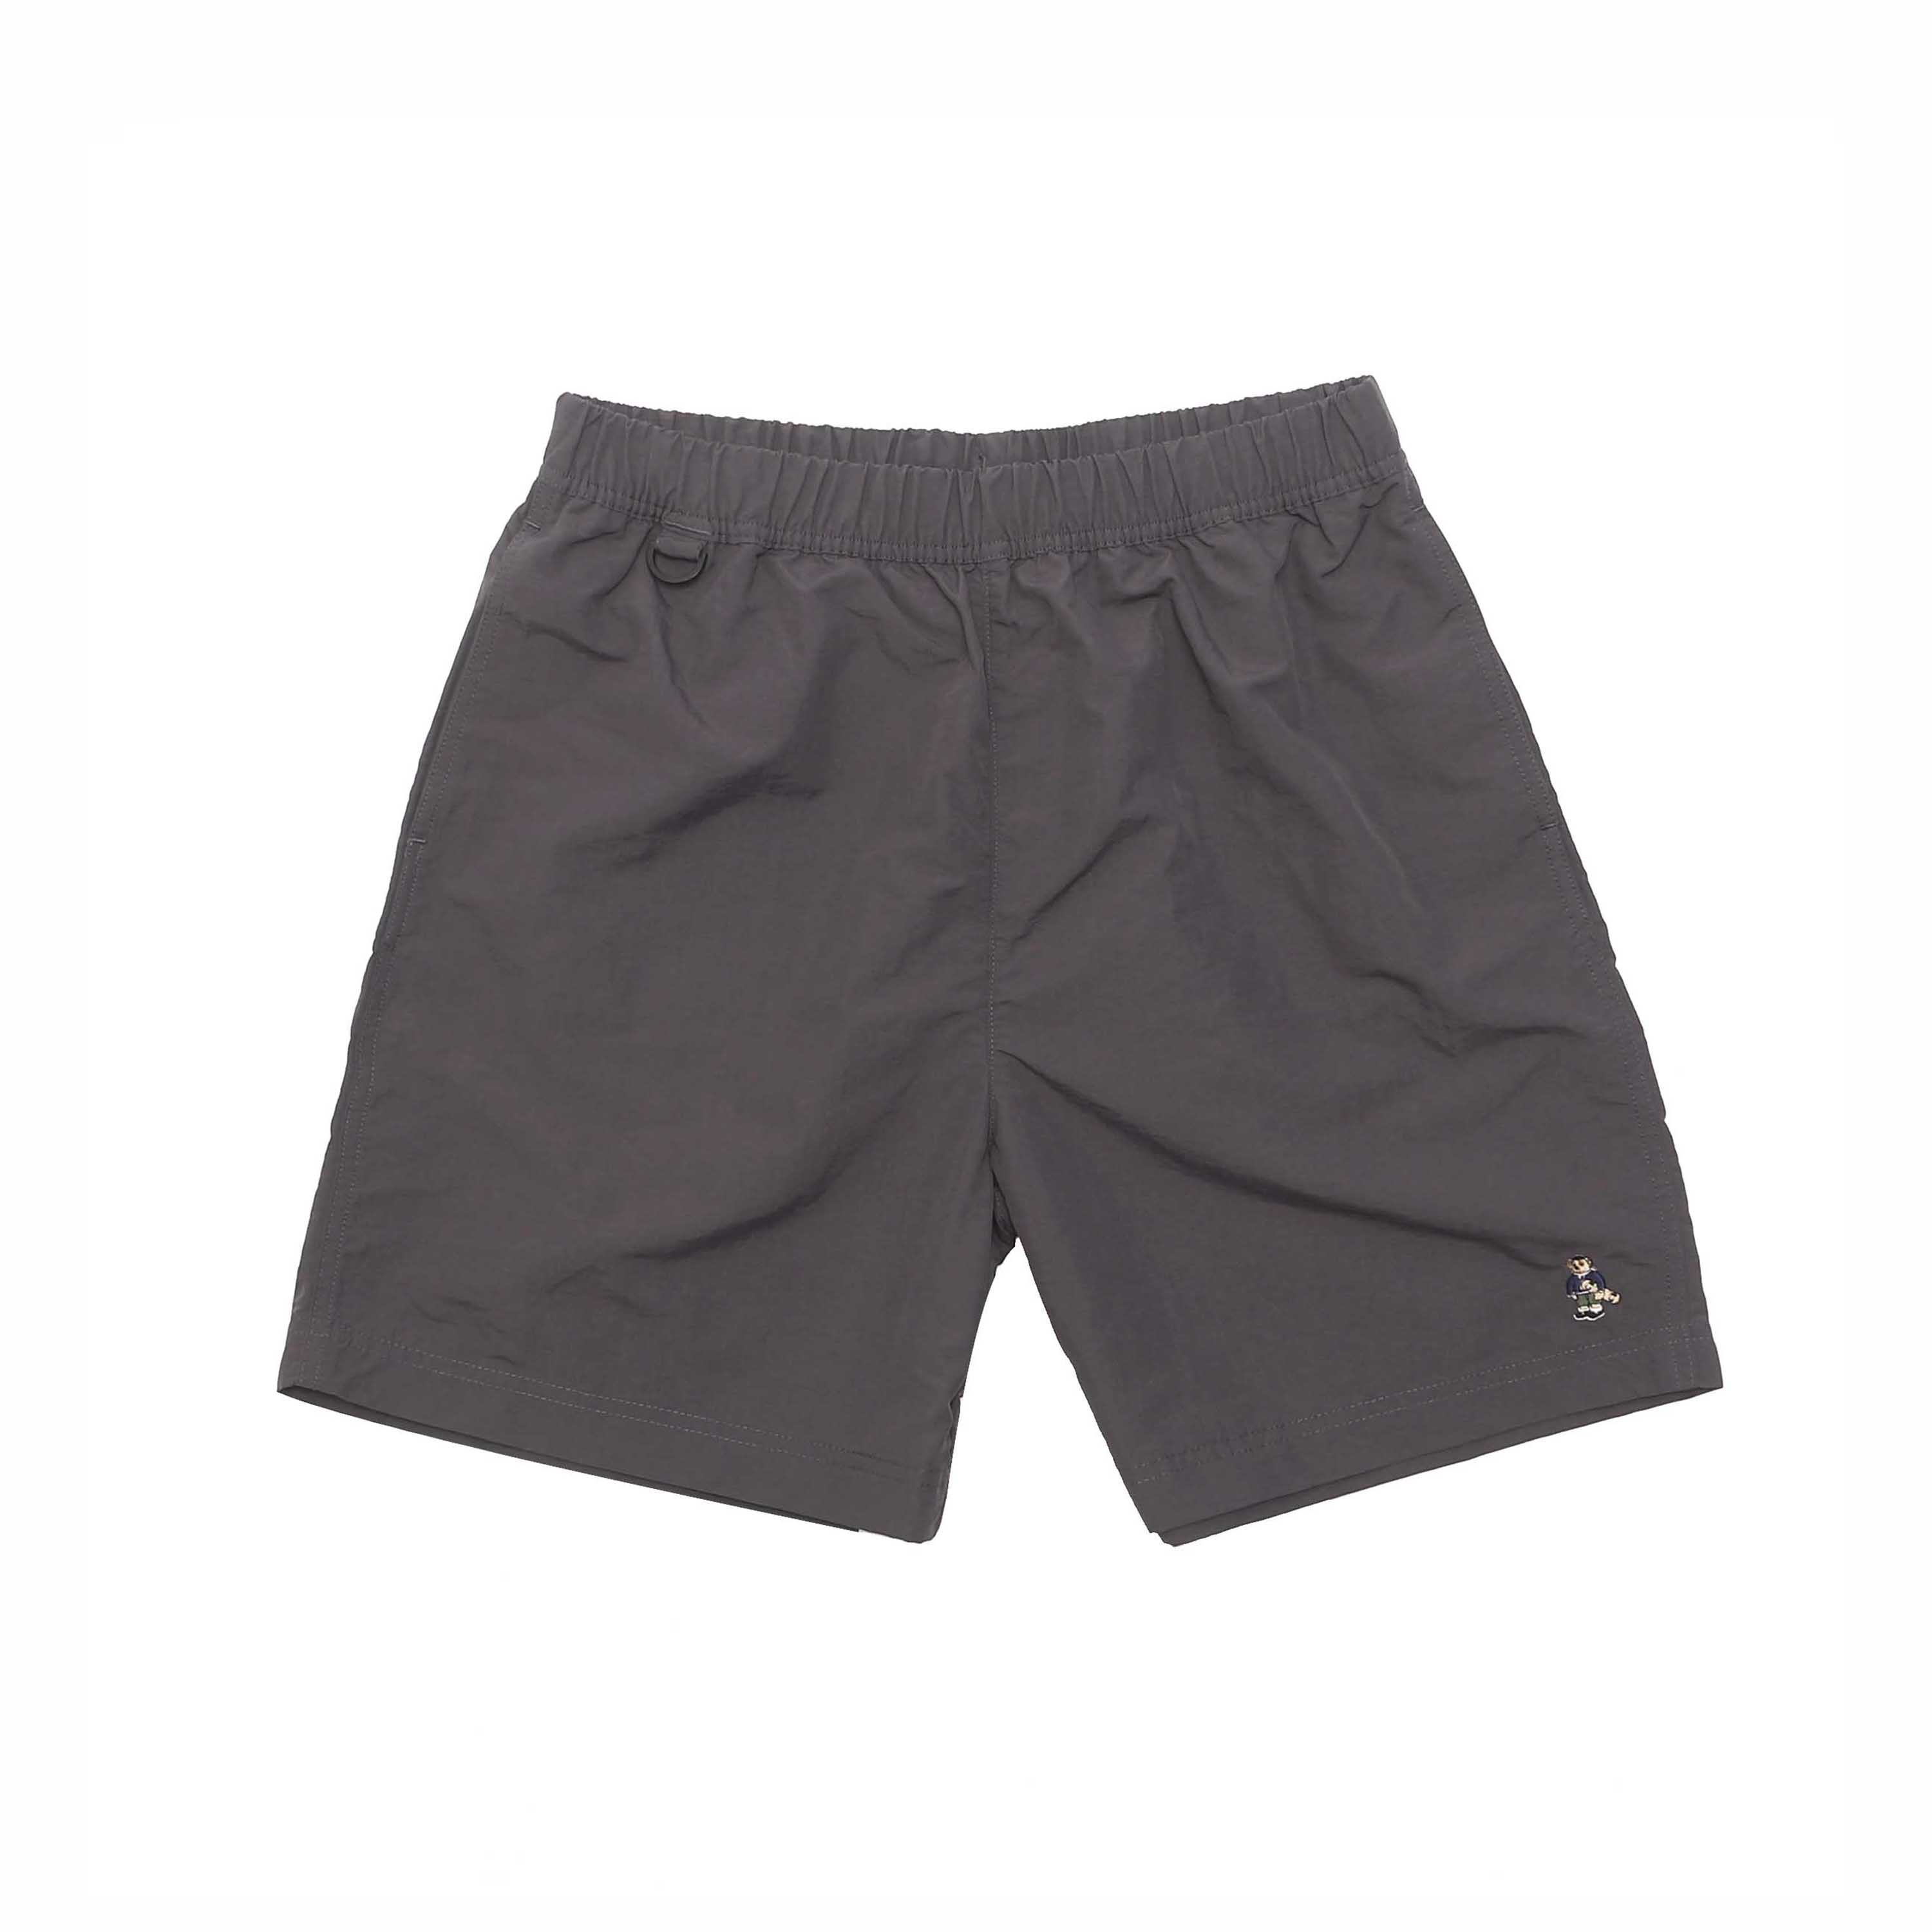 ROSTER BEAR SK8 SHORTS - CHARCOAL